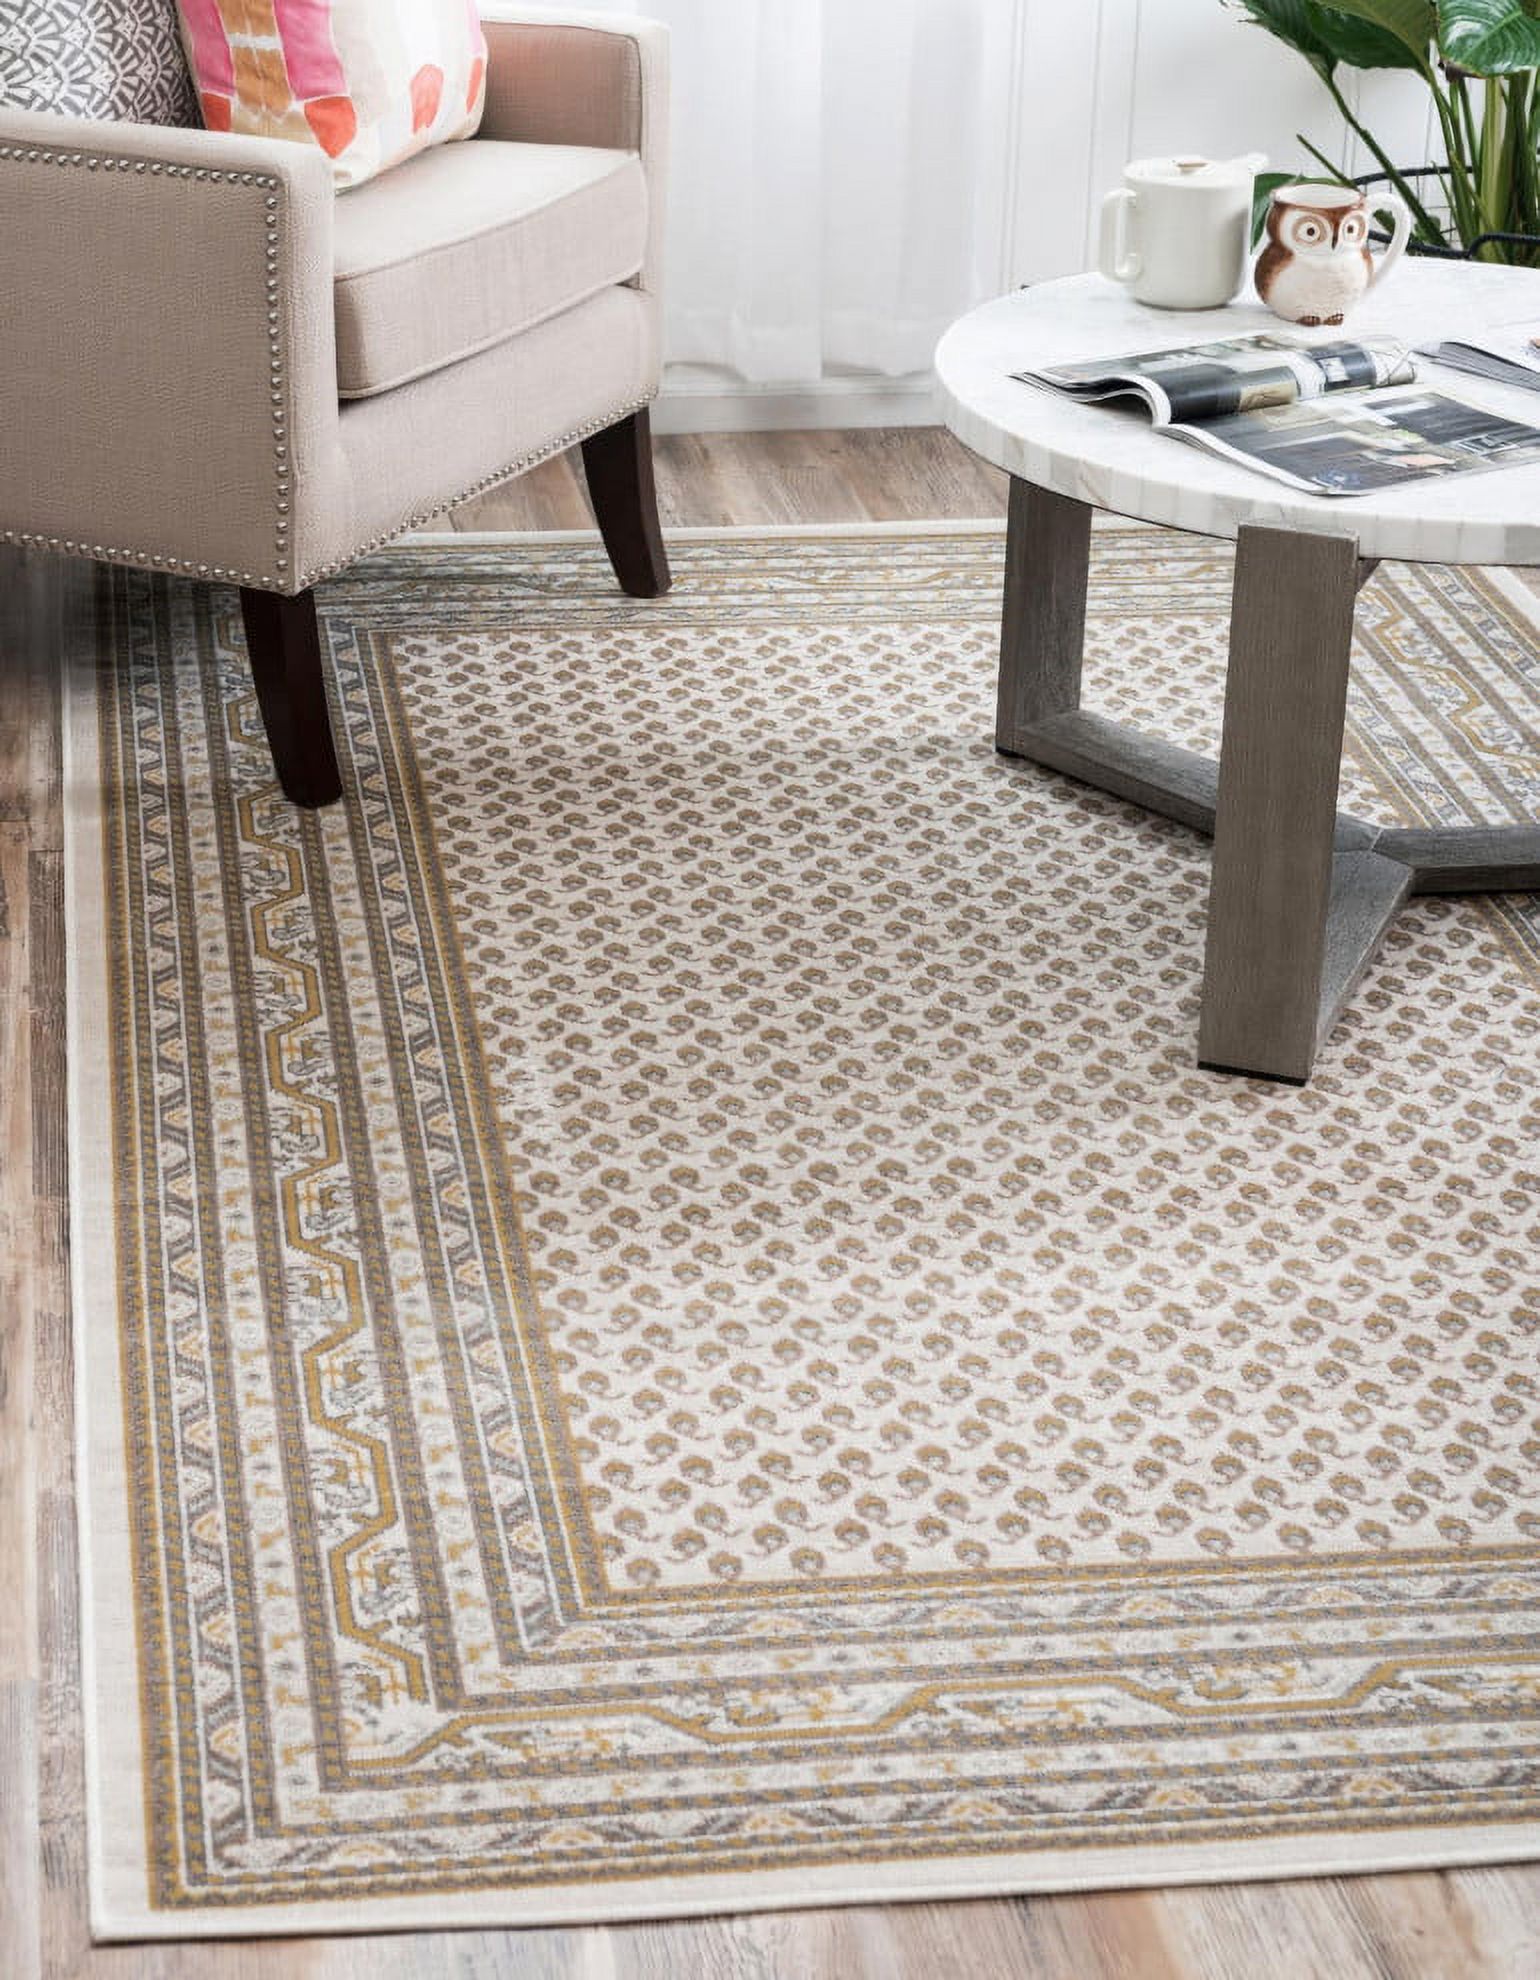 Unique Loom Indoor Rectangular Geometric Traditional Area Rugs Beige/Yellow/Off-White, 10' 0 x 13' 0 - image 3 of 4